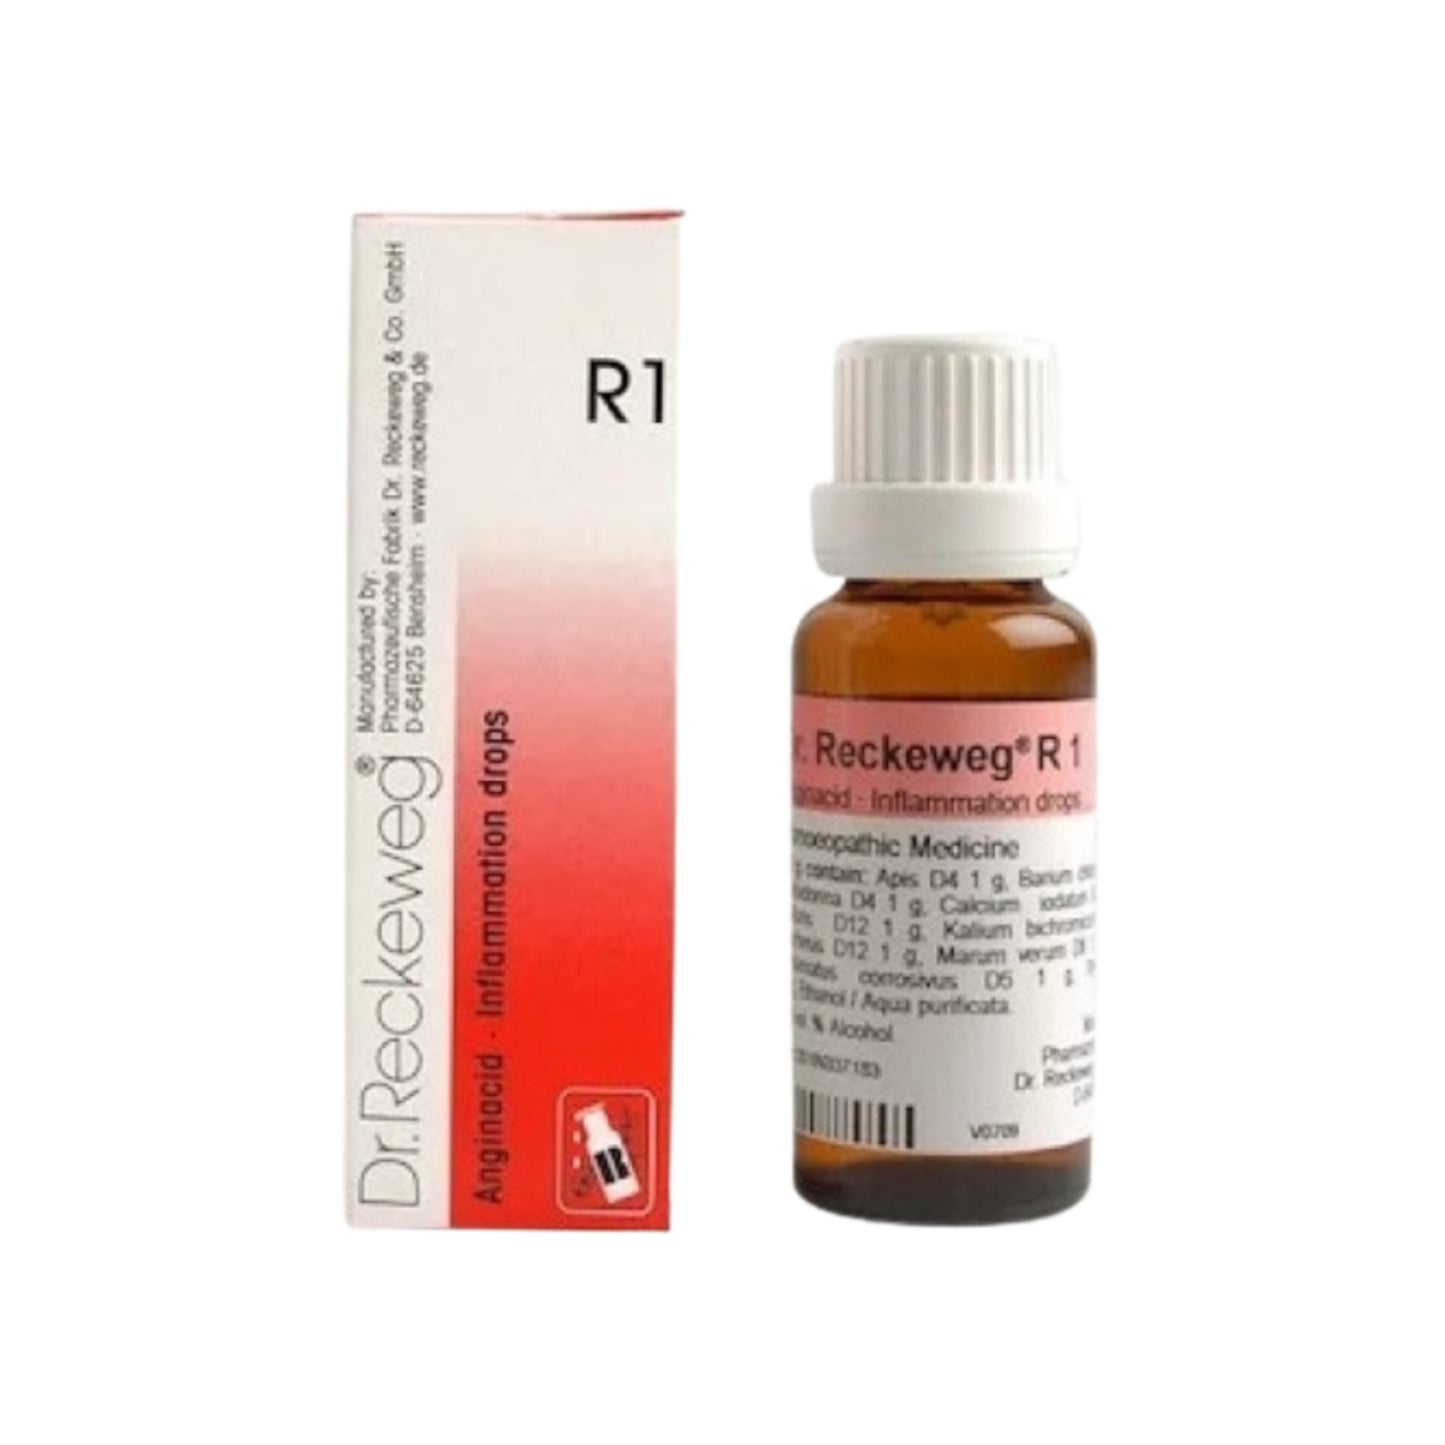 Image for DR. RECKEWEG R1 - Anginacid Drops 22 ml: Homeopathic remedy for tonsillitis and related inflammations.